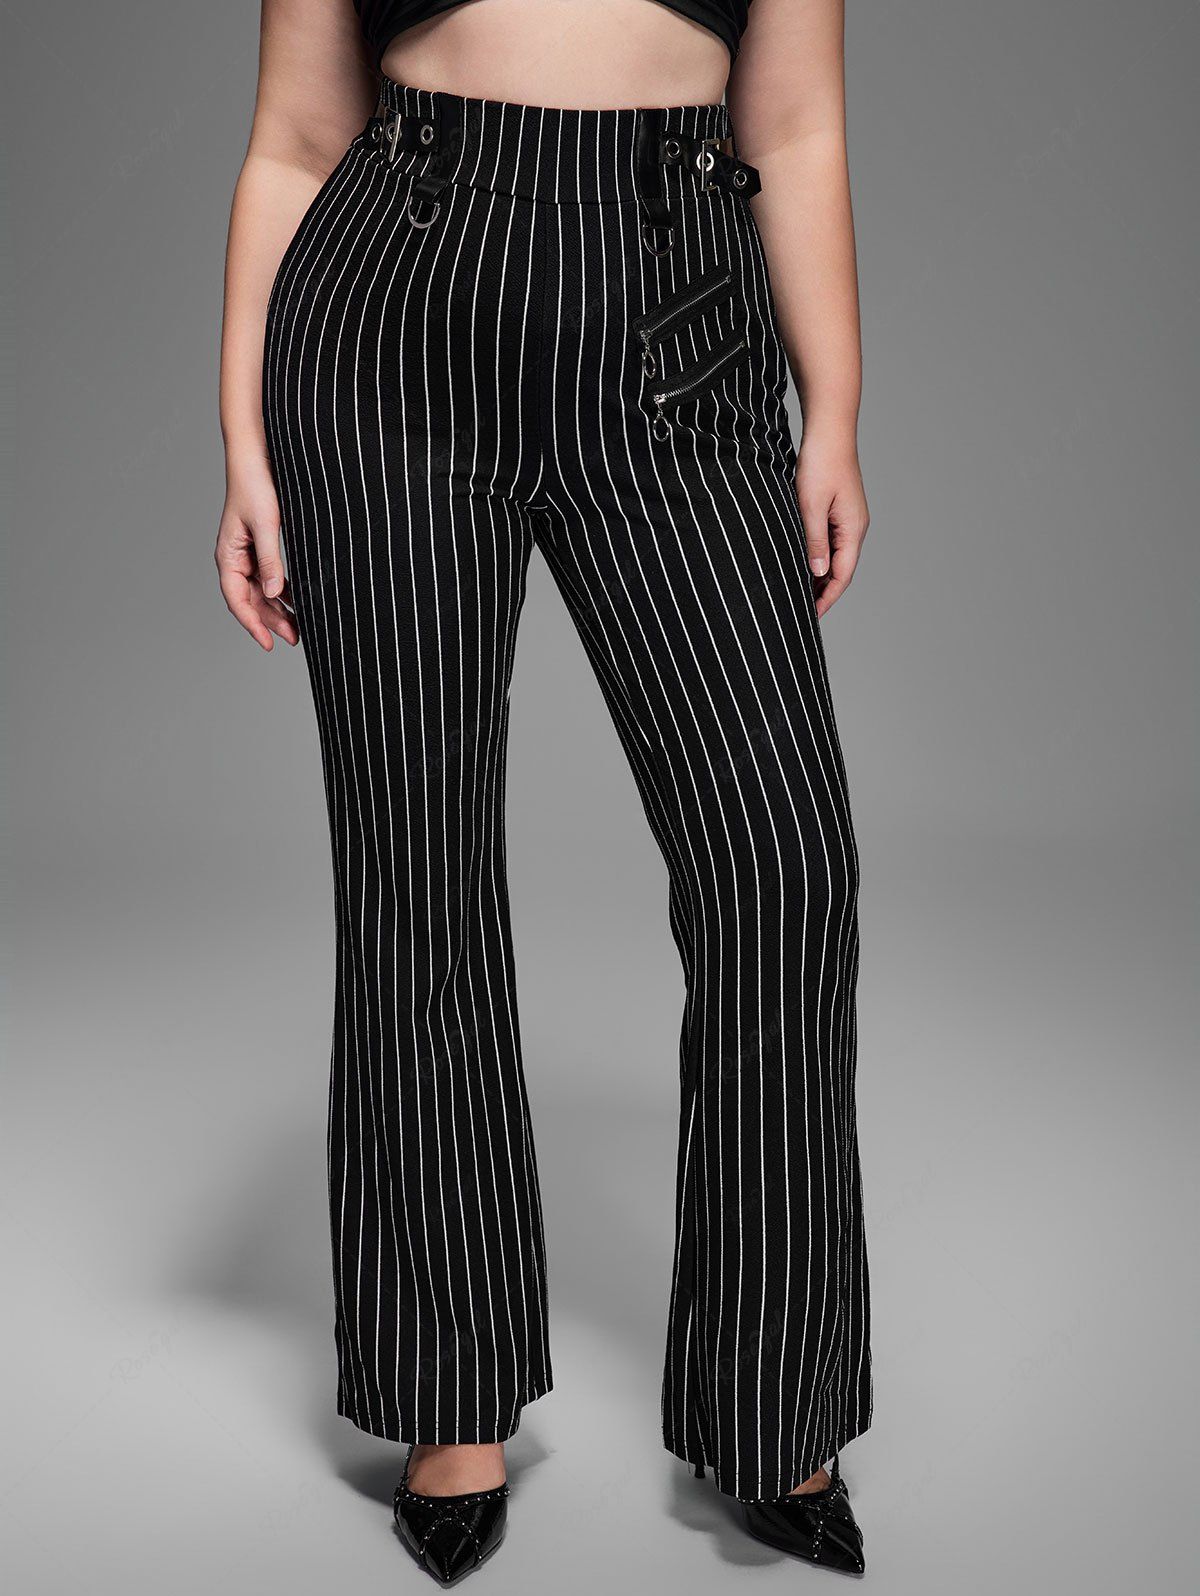 Gothic Zipper Striped PU Panel Buckle Rings Grommet Flare Pants